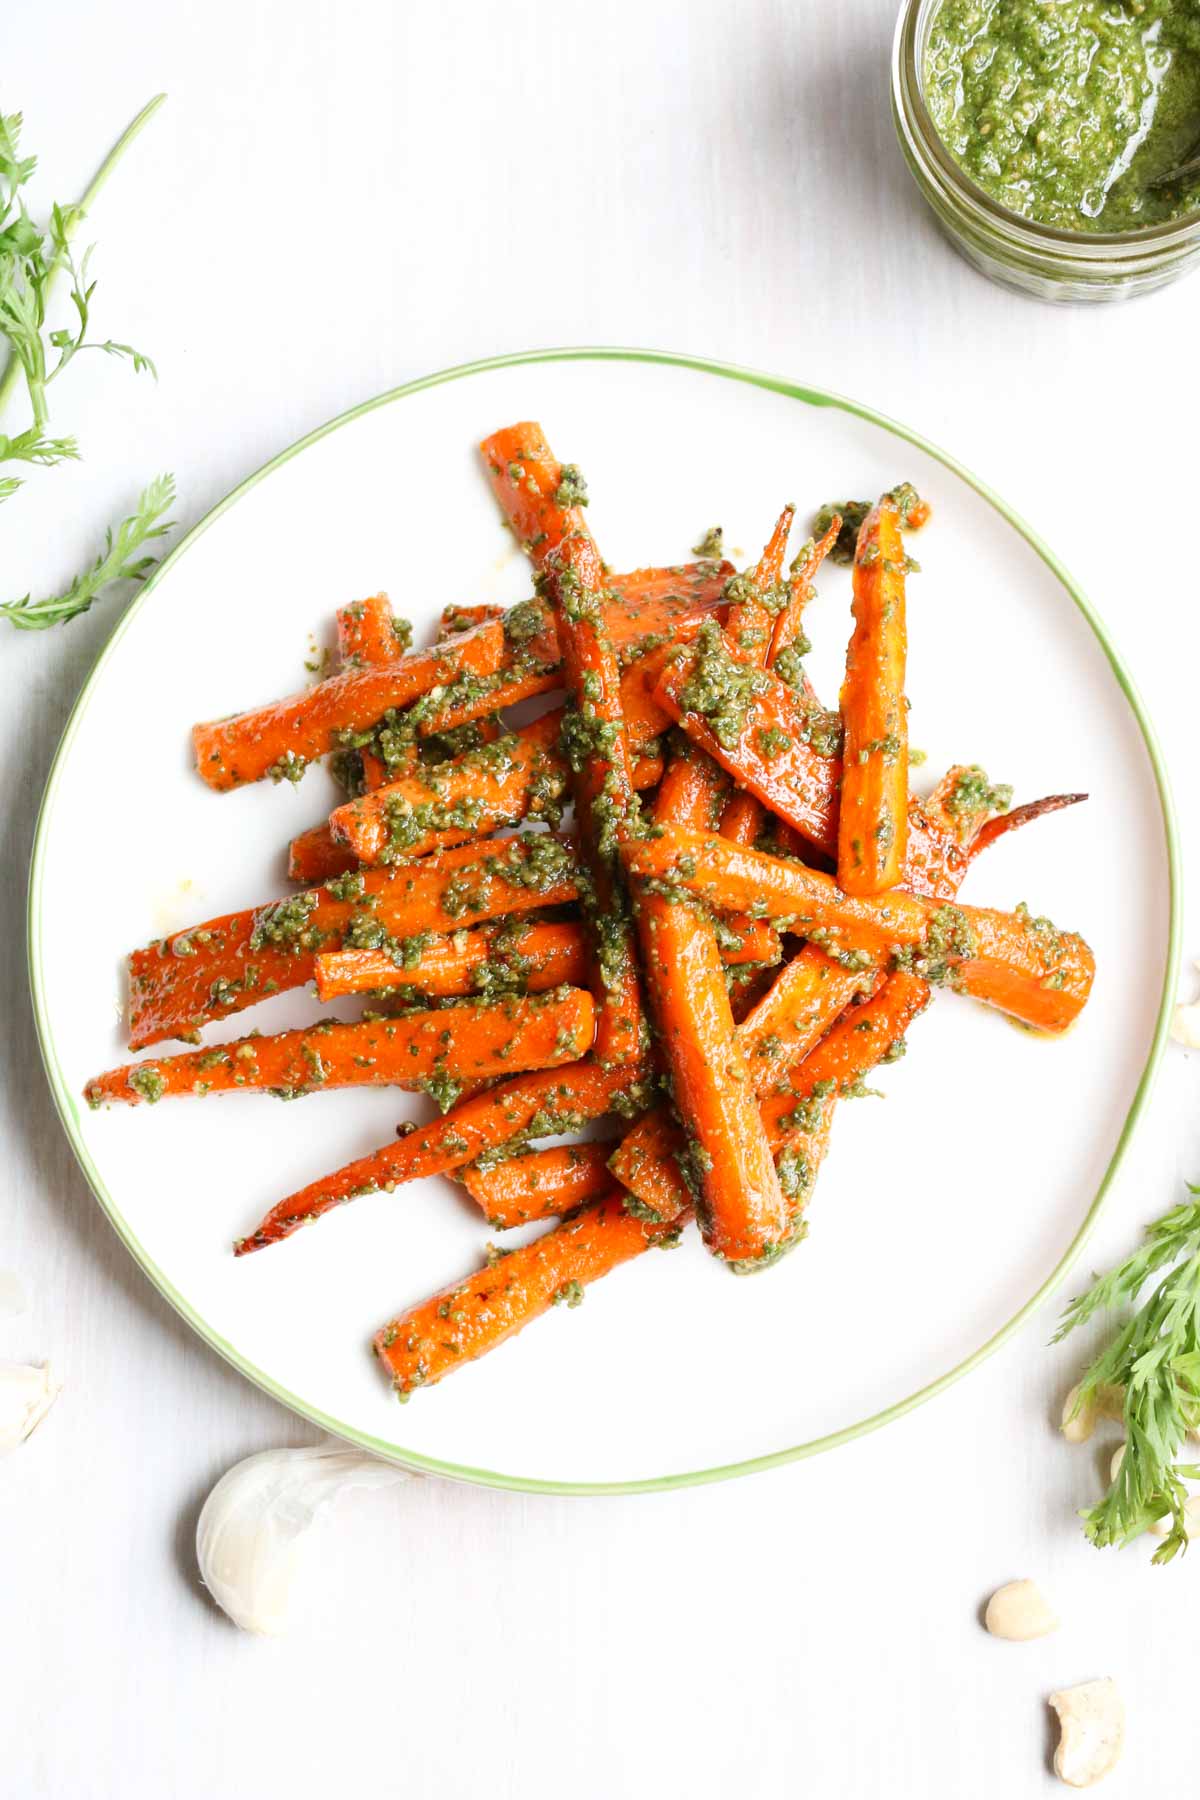 Cashew Carrot Top Pesto with Roasted Carrots. Once you taste a carrot top you will never throw it away again! Gluten free, Healthy, Nutritious |abraskitchen.com